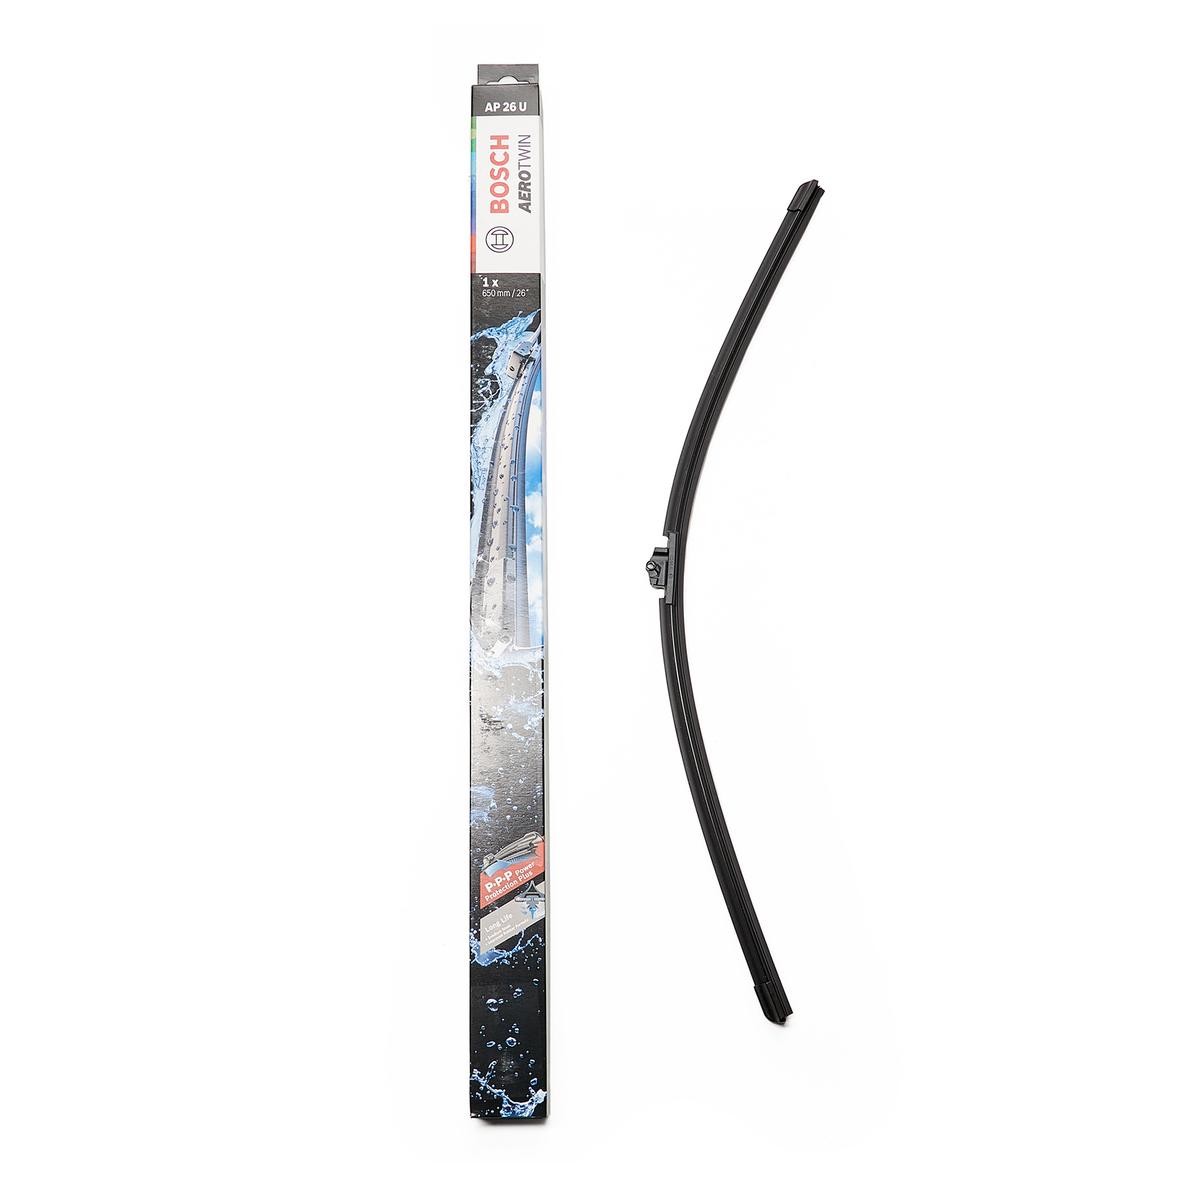 Windshield wipers 3 397 006 838 review